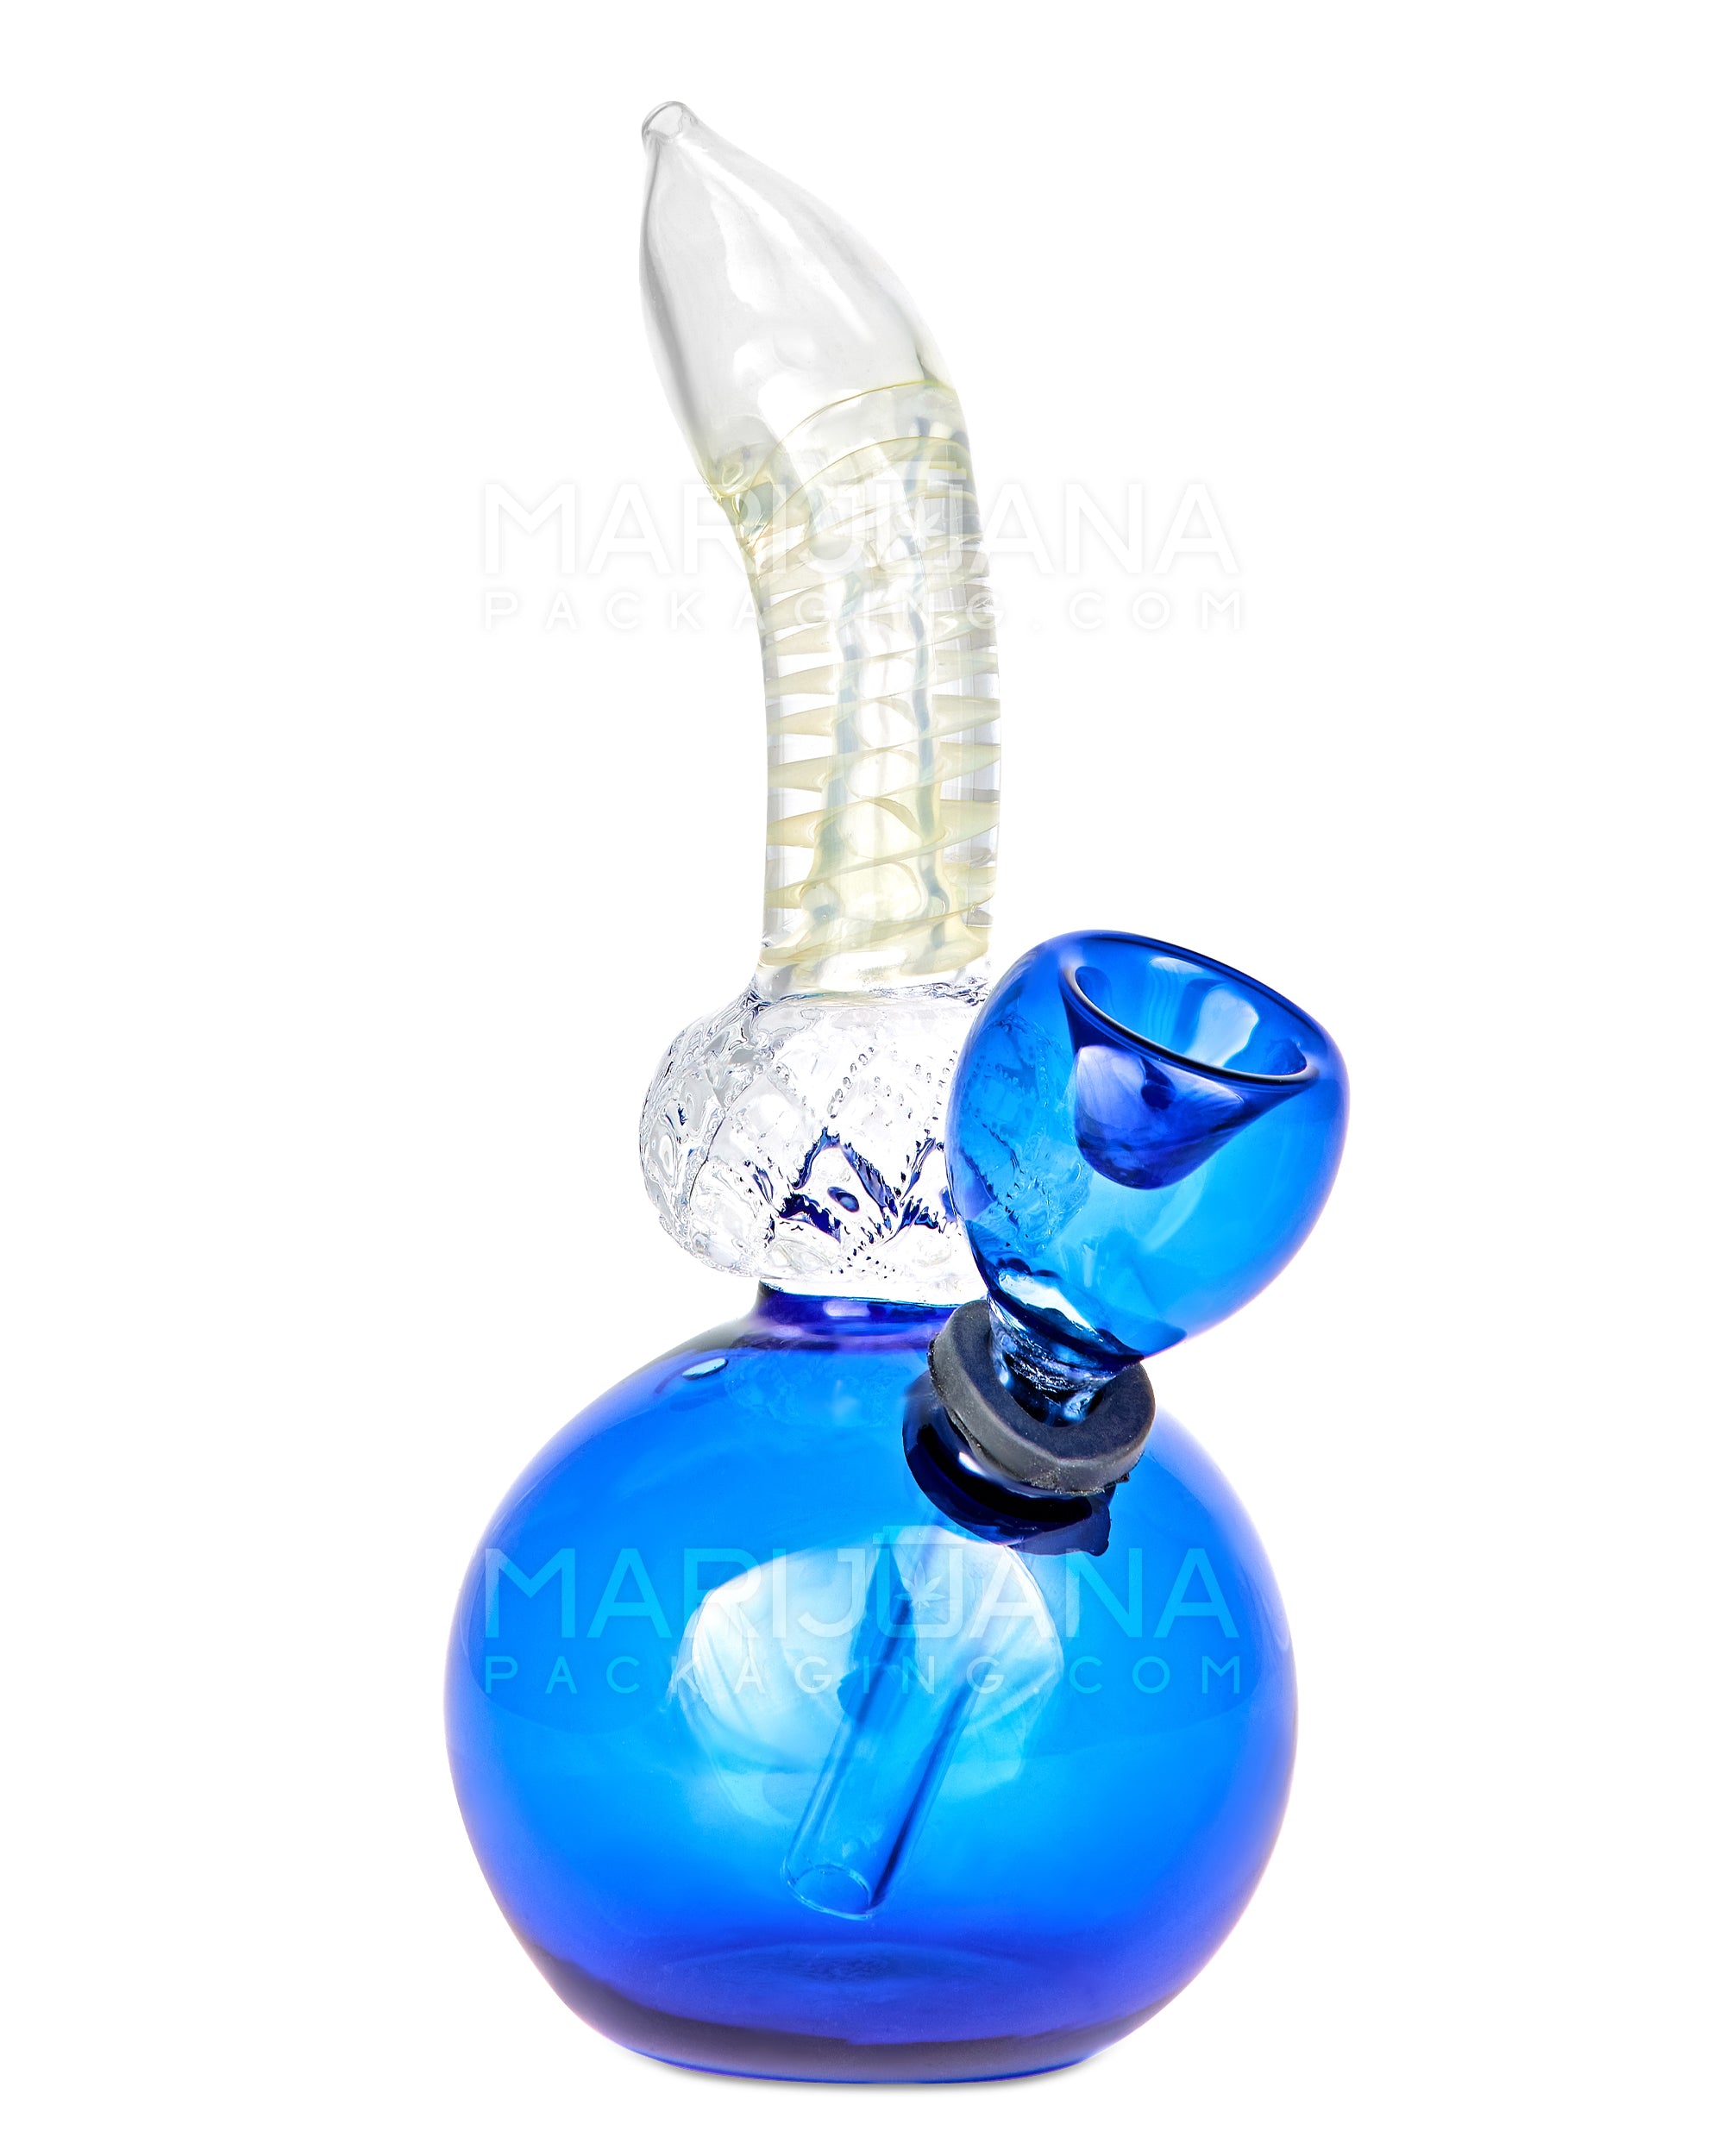 Bent Neck Glass Egg Water Pipe | 6in Tall - Grommet Bowl - Blue - 2